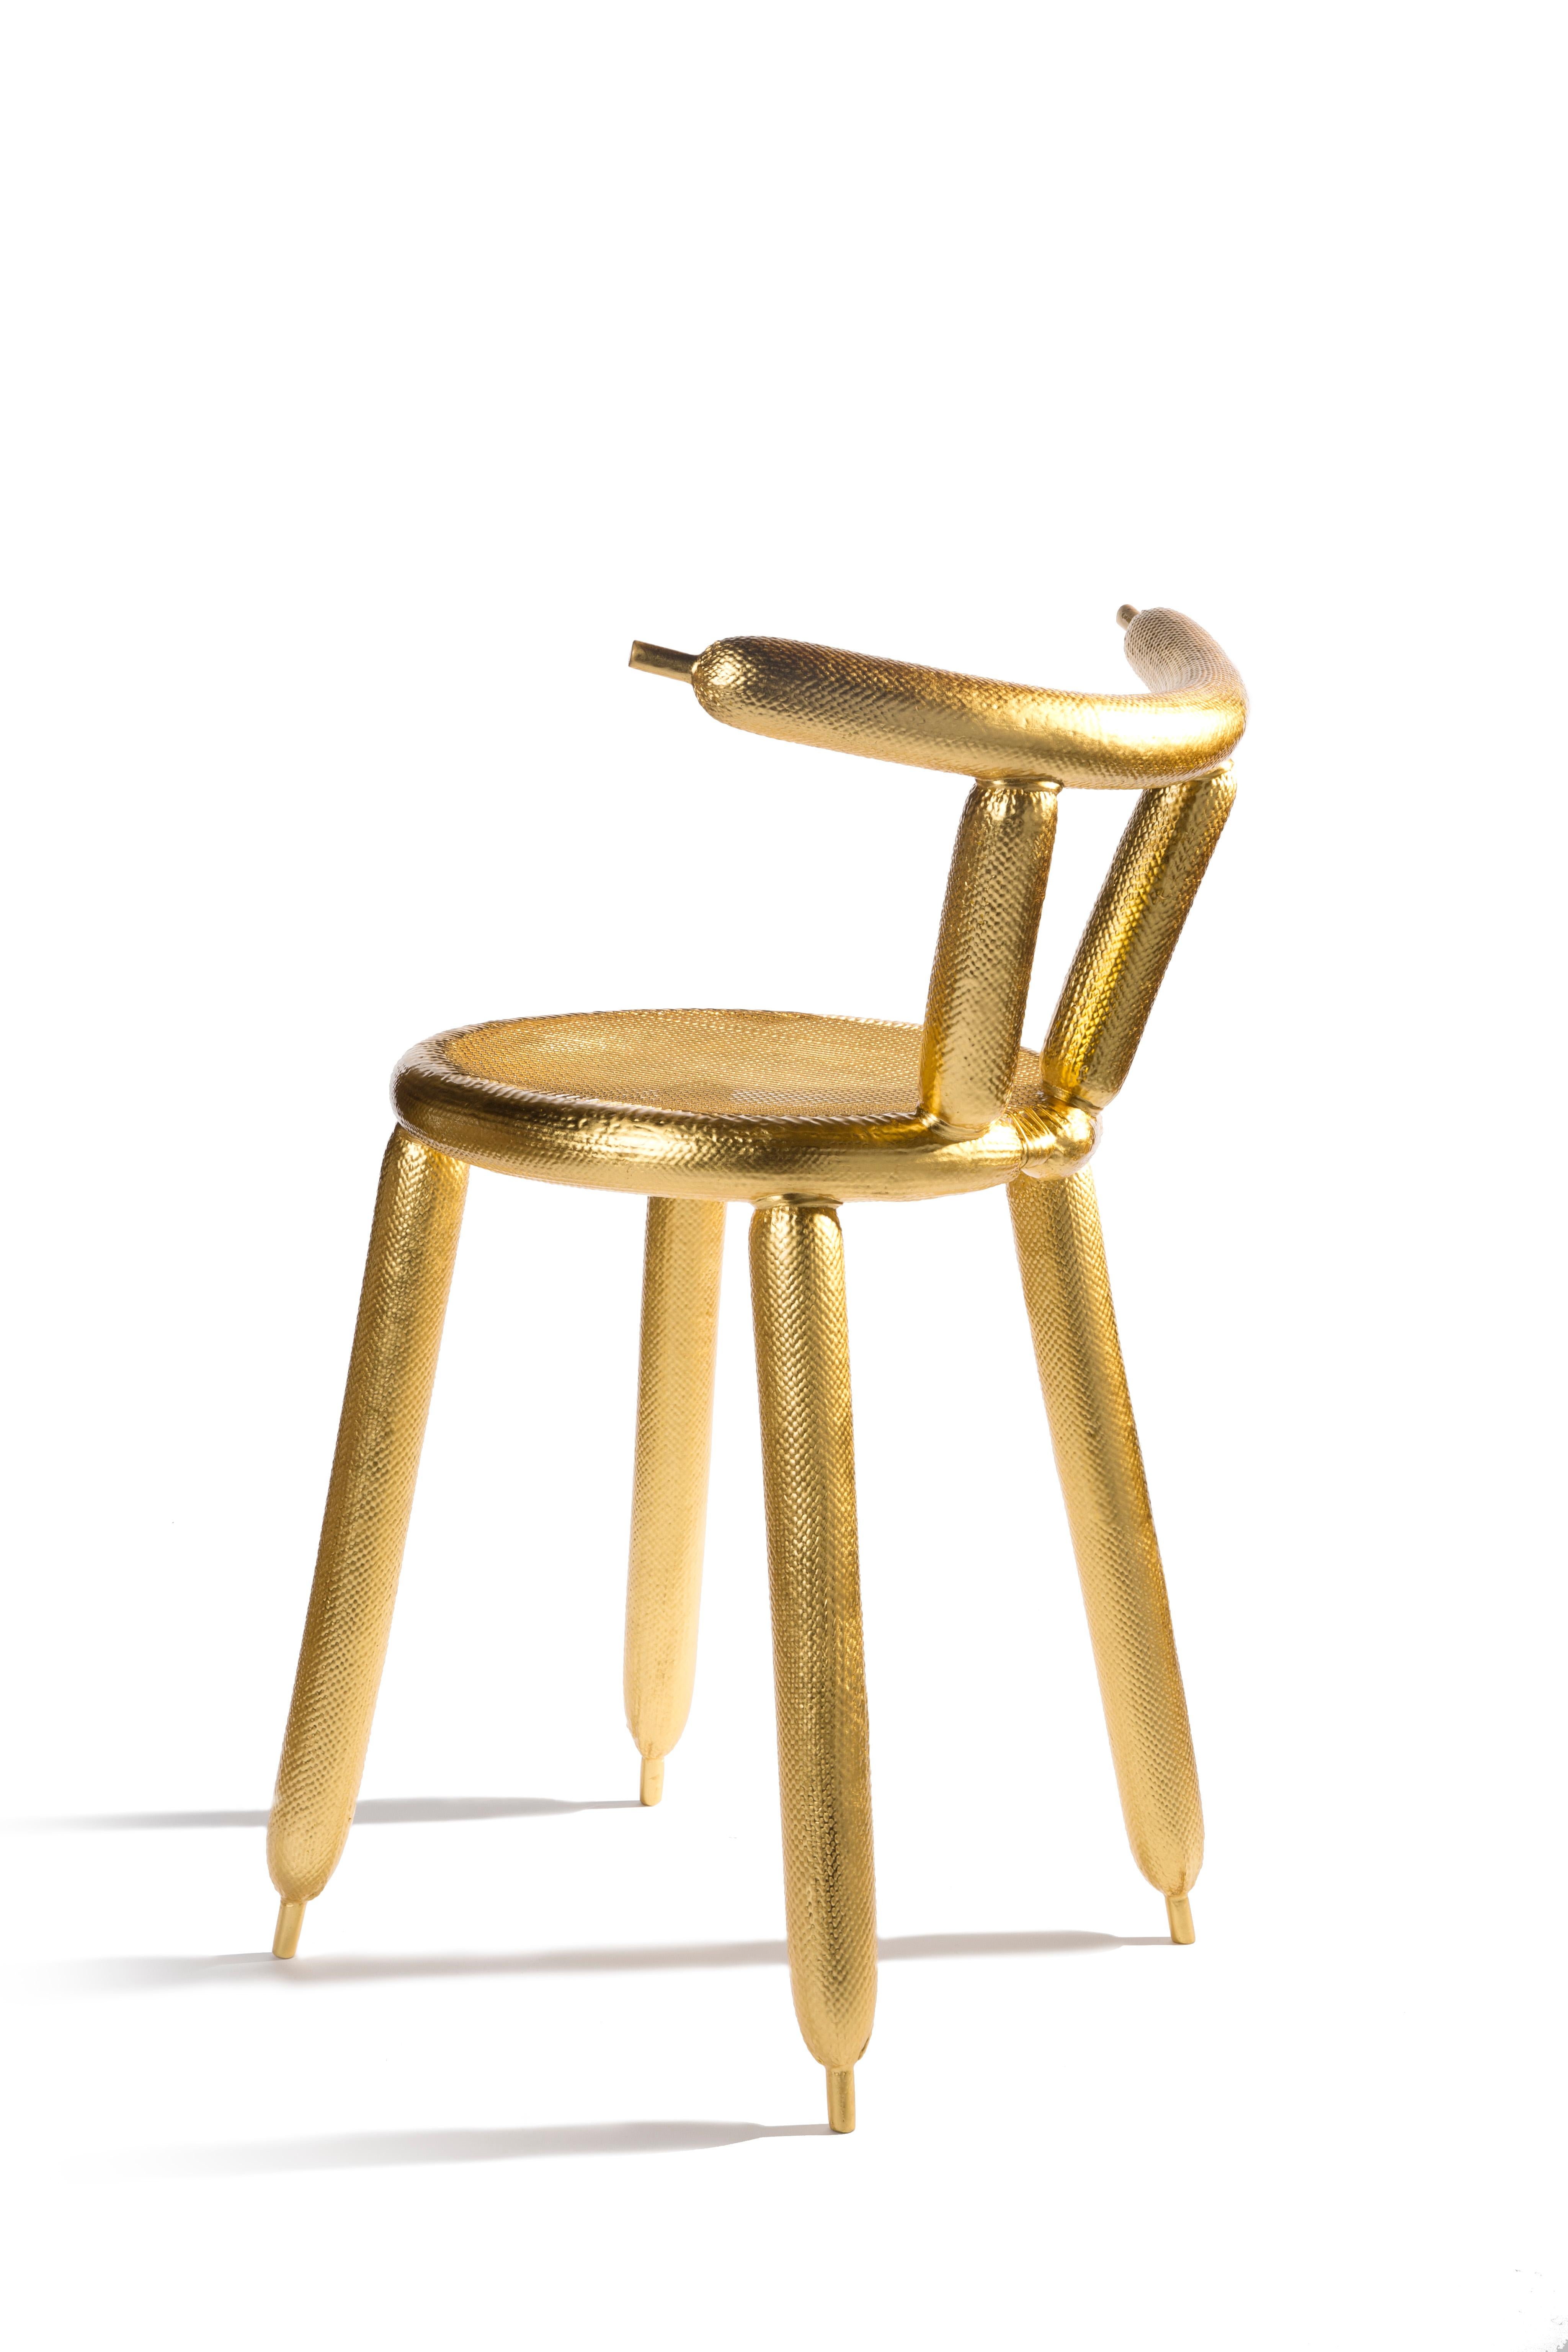 Contemporary Carbon Balloon Chair Gold, by Marcel Wanders, 2013, Limited Edition #2/5 For Sale